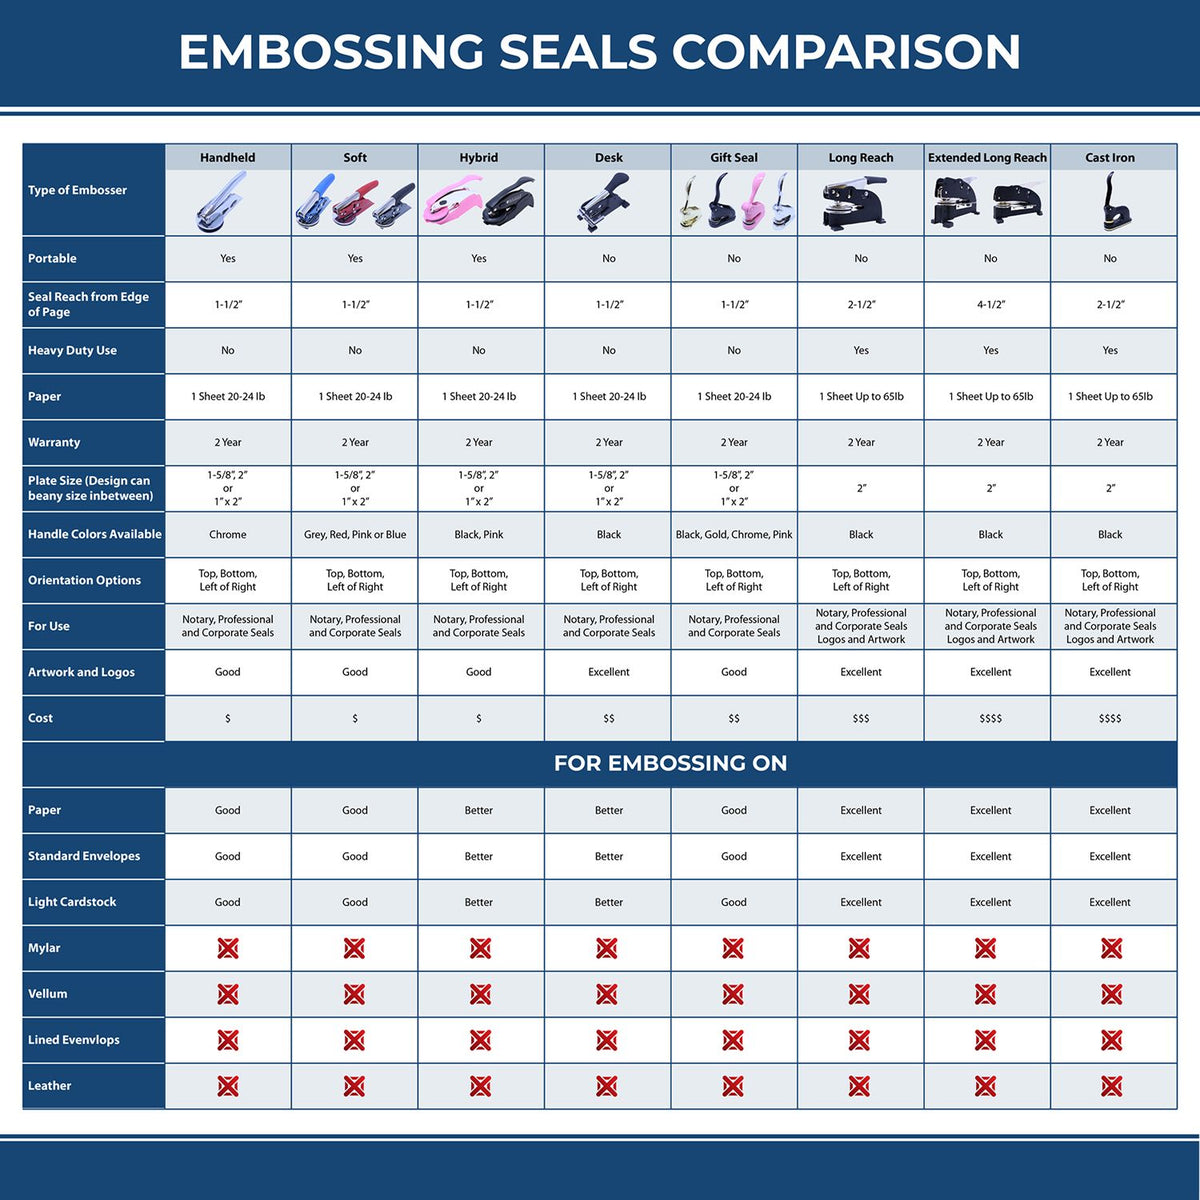 A comparison chart for the different types of mount models available for the State of Washington Architectural Seal Embosser.